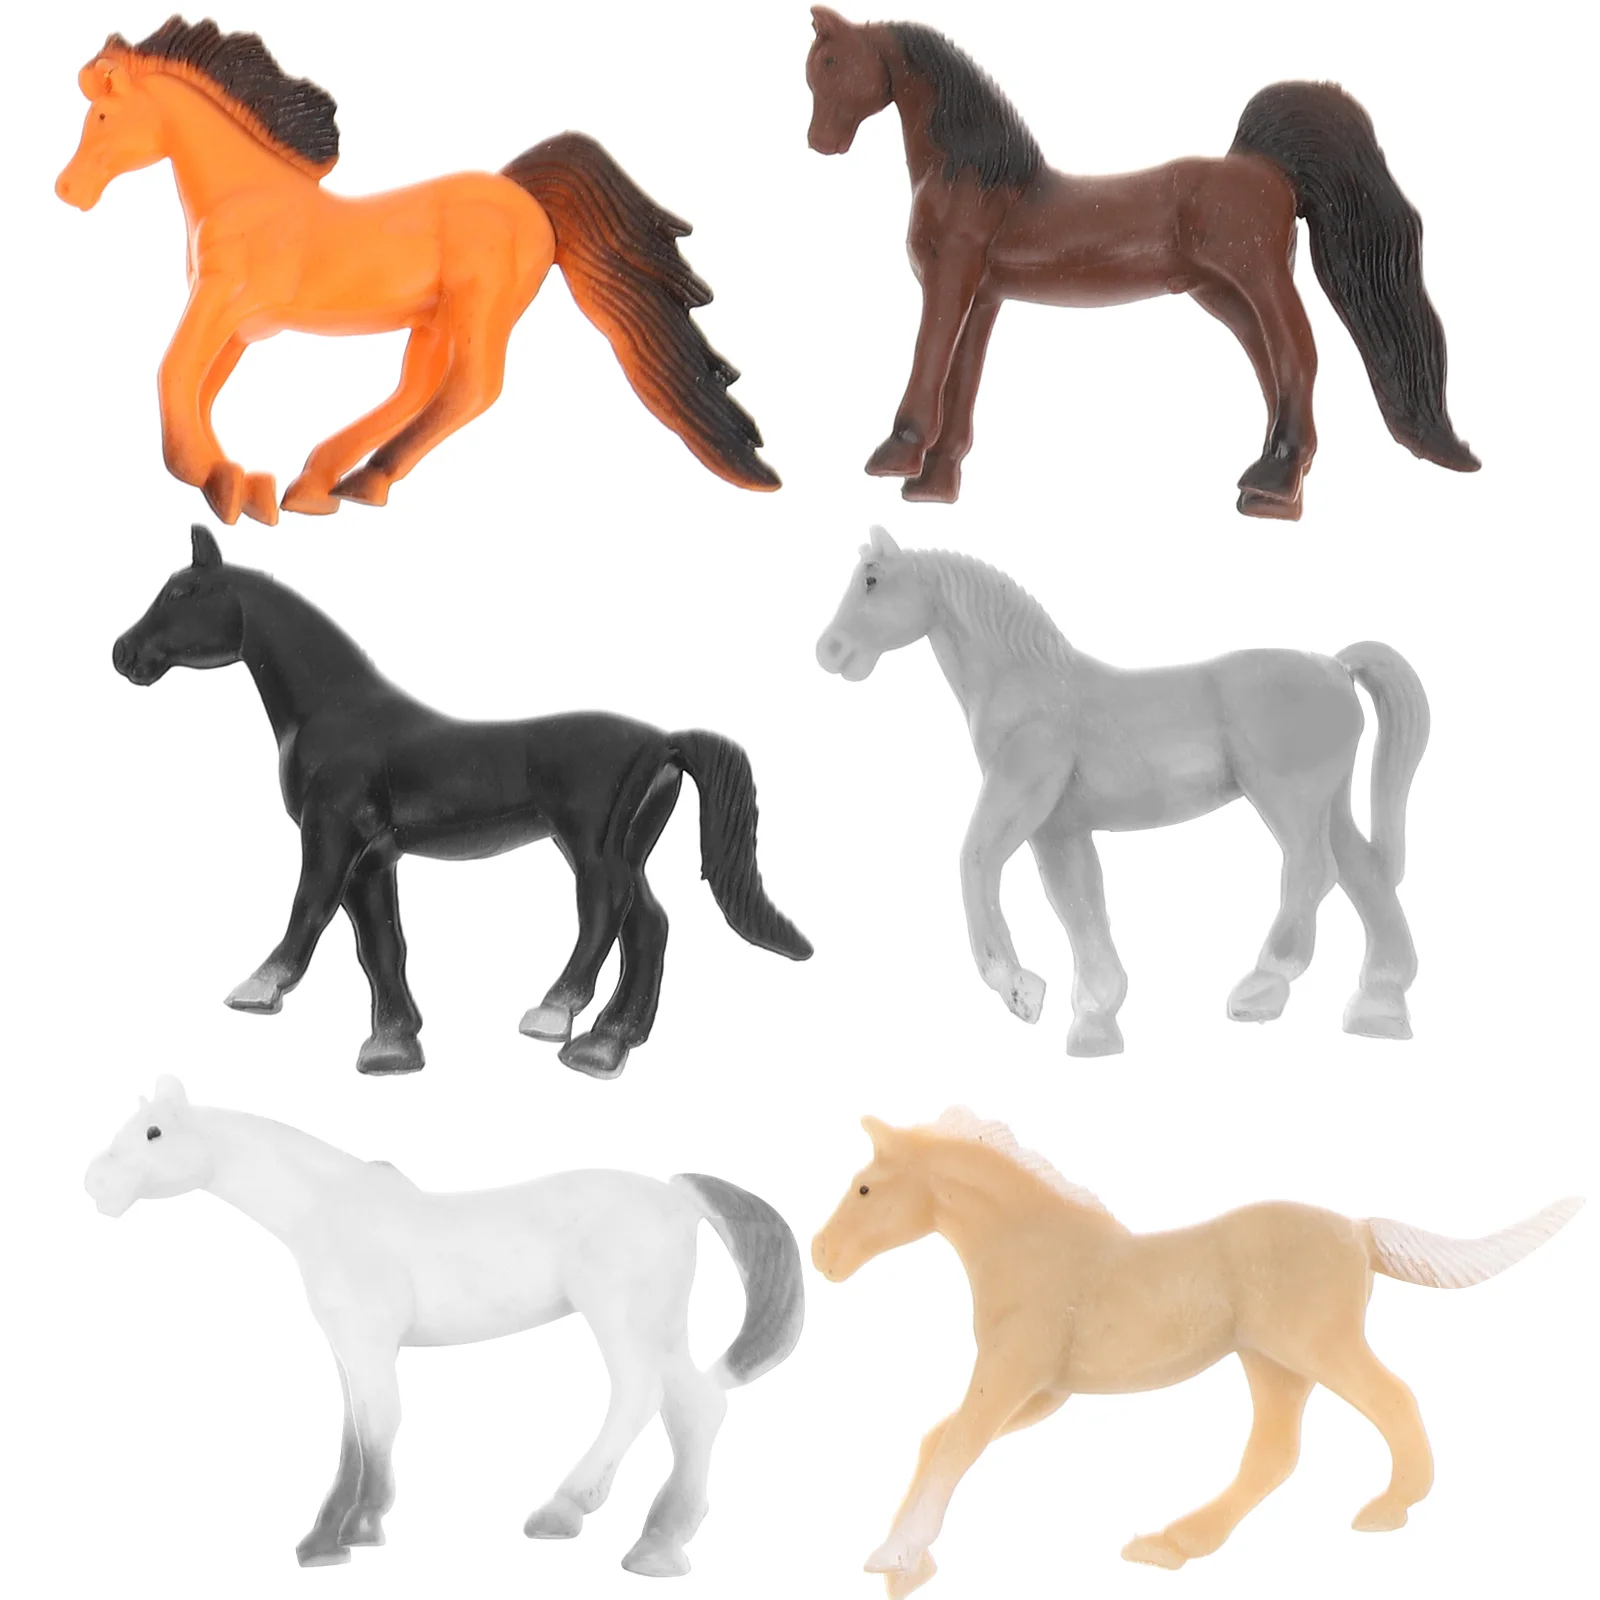 

Miniature Horse Tiny Animals Figures Figurines for Kids Educational Cognitive Toy Toys Model Horses Girls